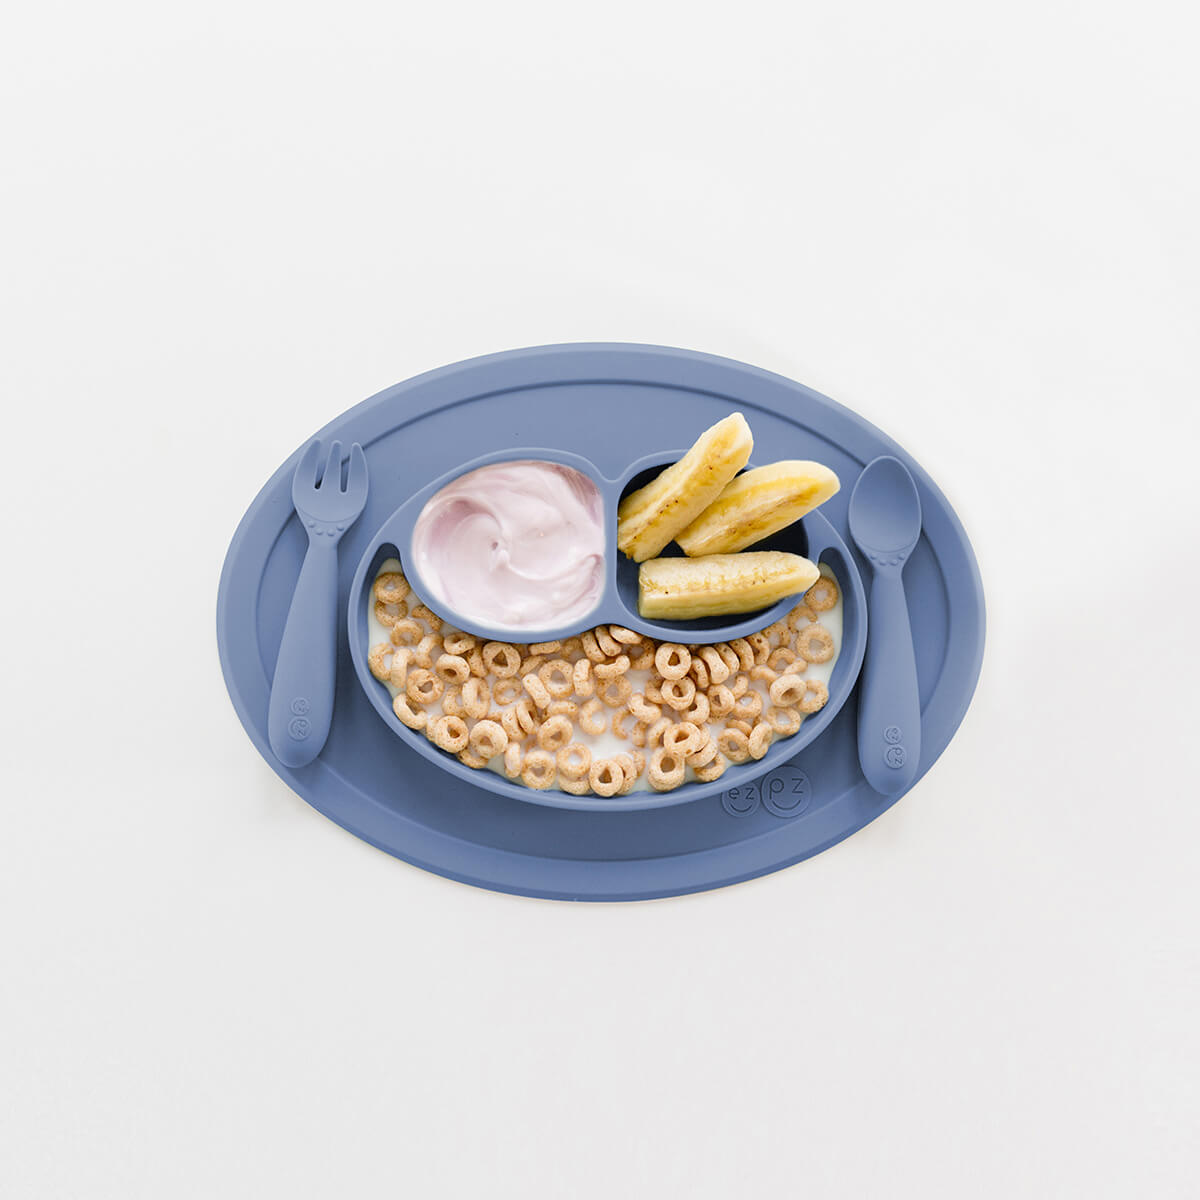 Mini Feeding Set in Indigo Blue by ezpz / Silicone Plate, Fork & Spoon for Toddlers